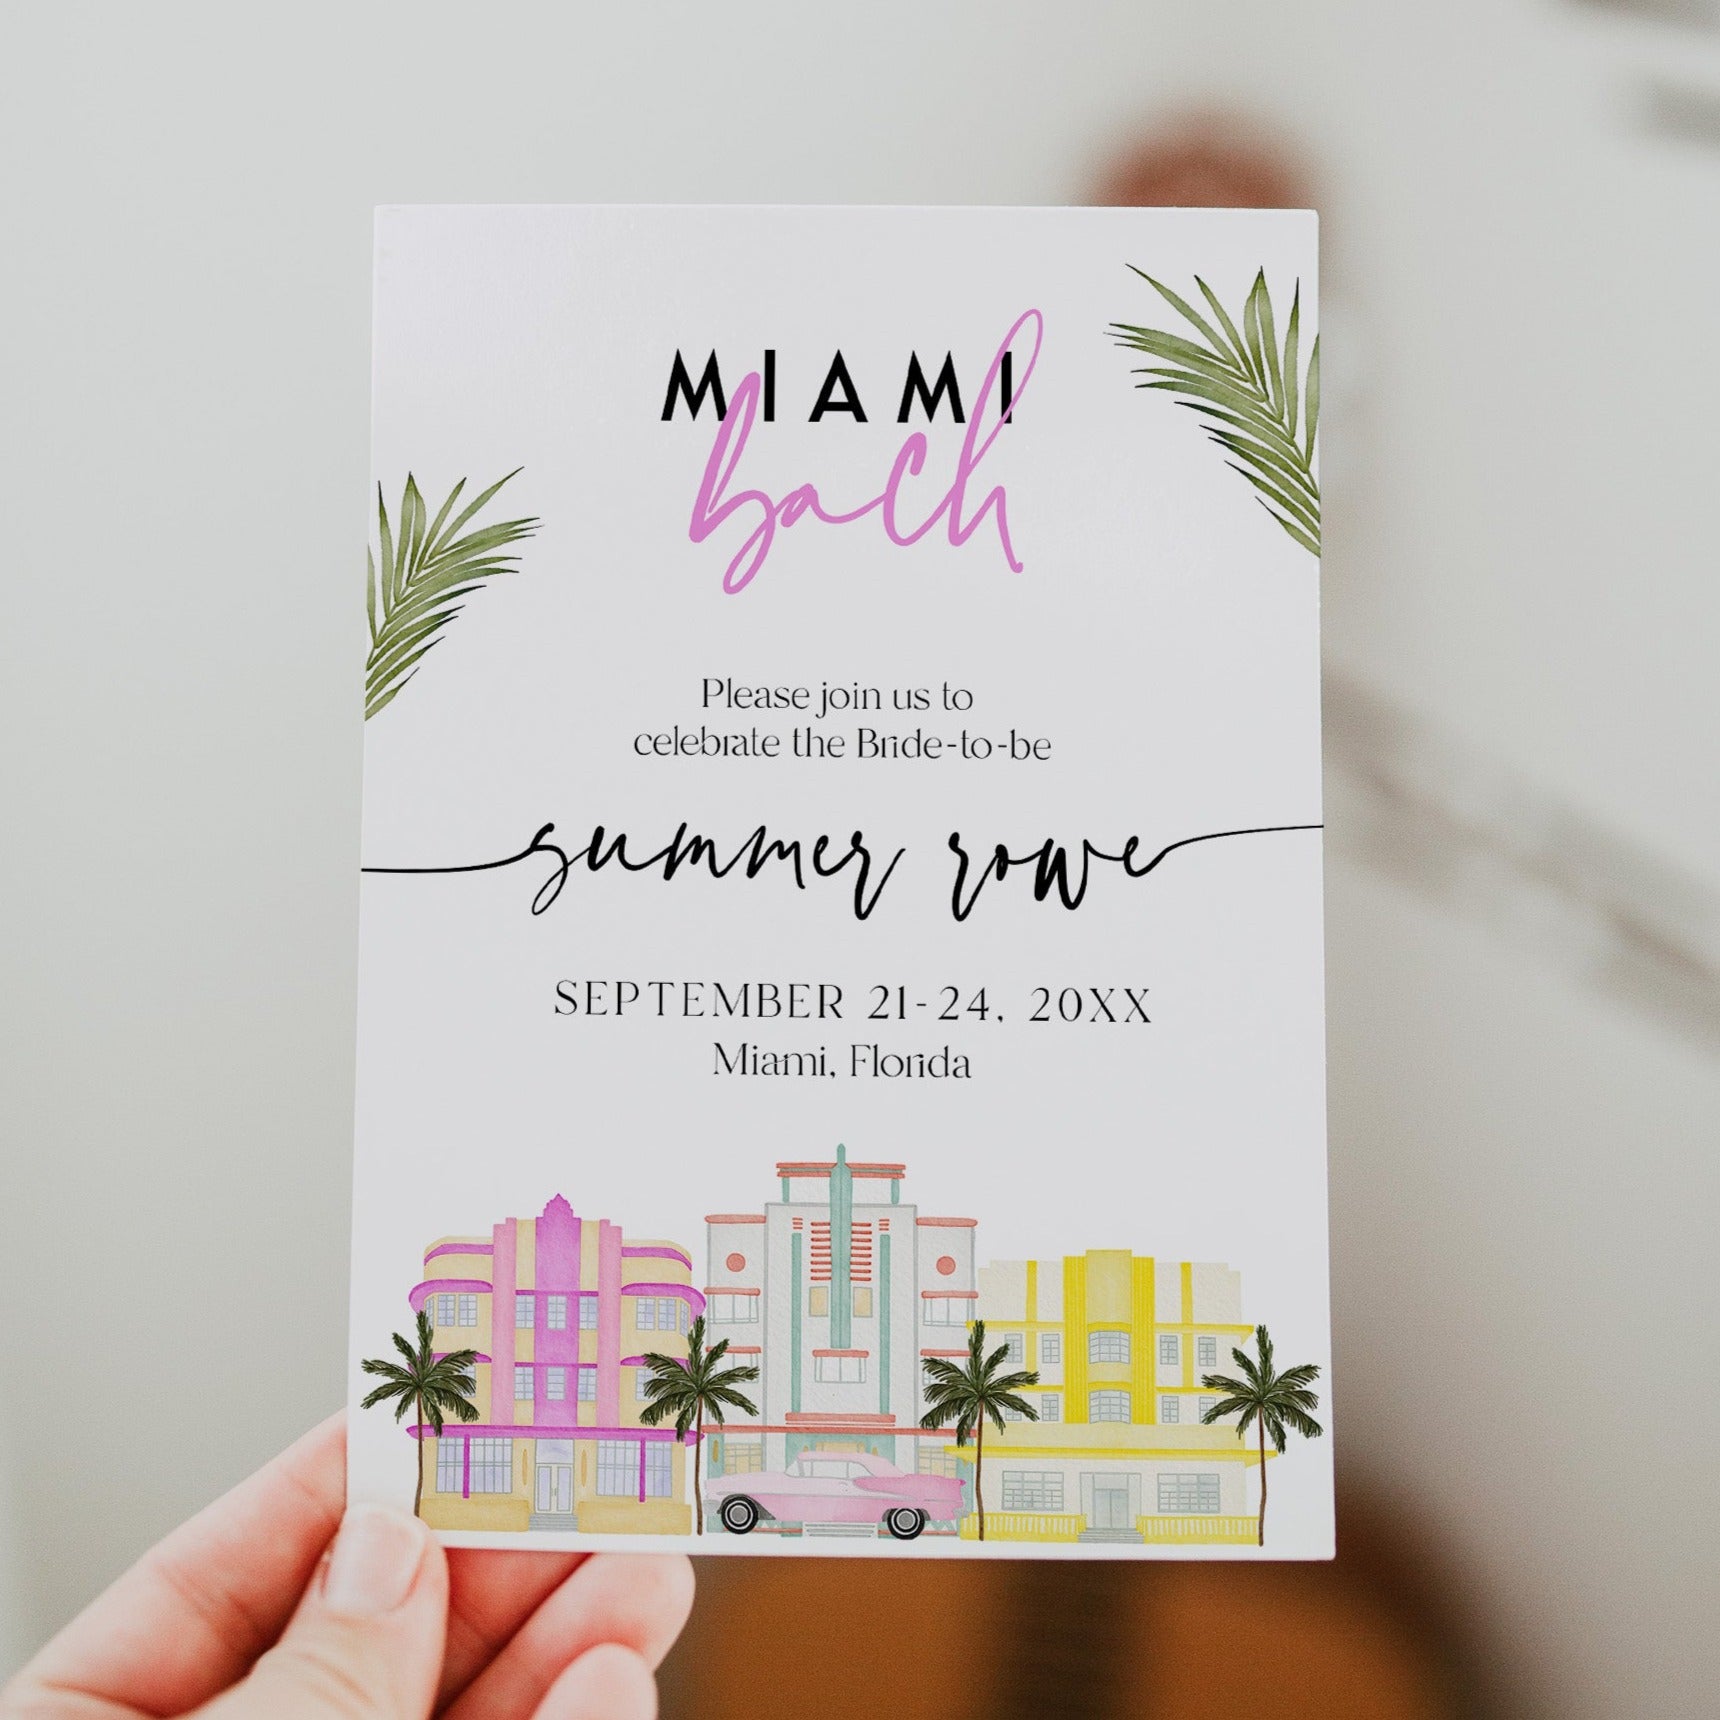 Fully editable and printable bachelorette weekend invitation with a miami design. Perfect for a miami, Bachelorette themed party